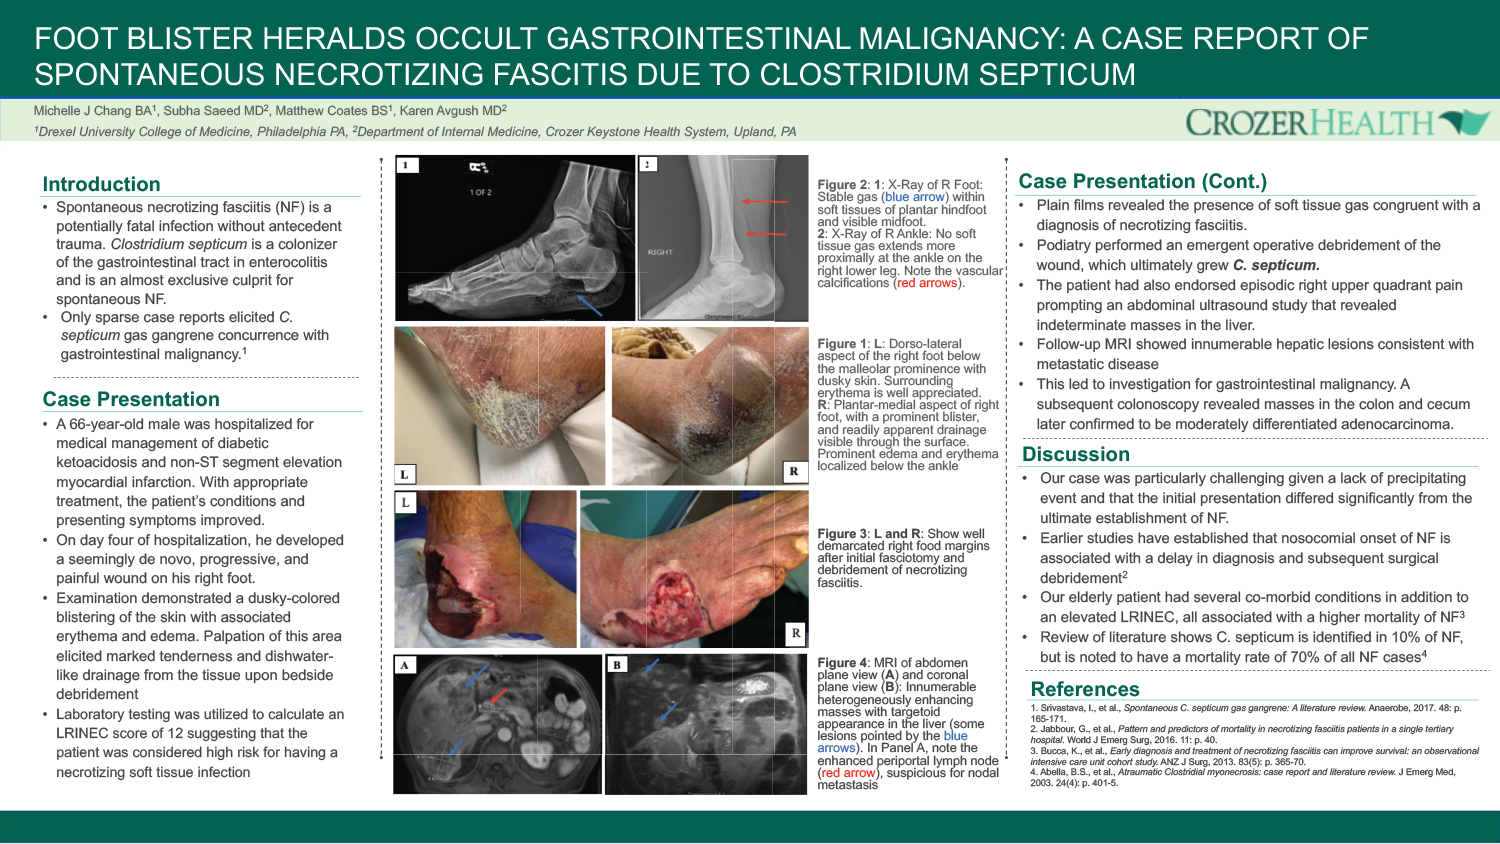 Michelle Chang - PAS-40-Foot Blister Heralds Occult Gastrointestinal Mlaignancy